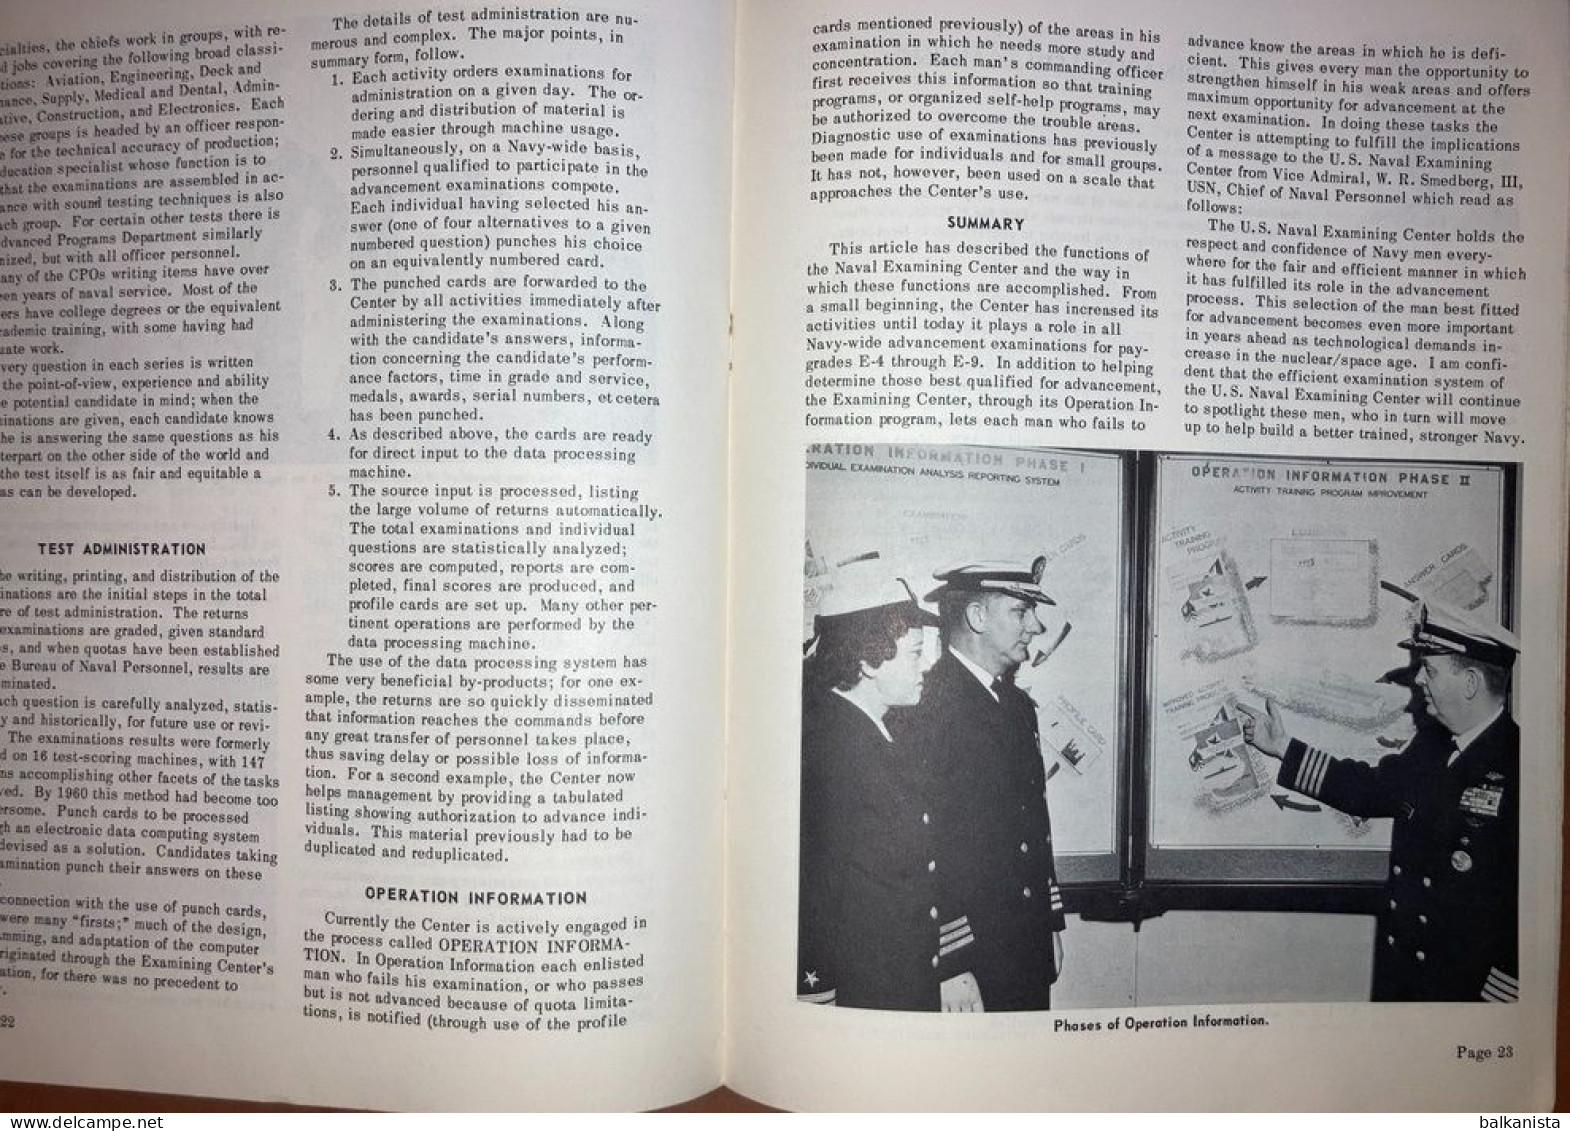 American US Army Naval Training Bulletin Spring 1963 - Naval Institute - Forces Armées Américaines